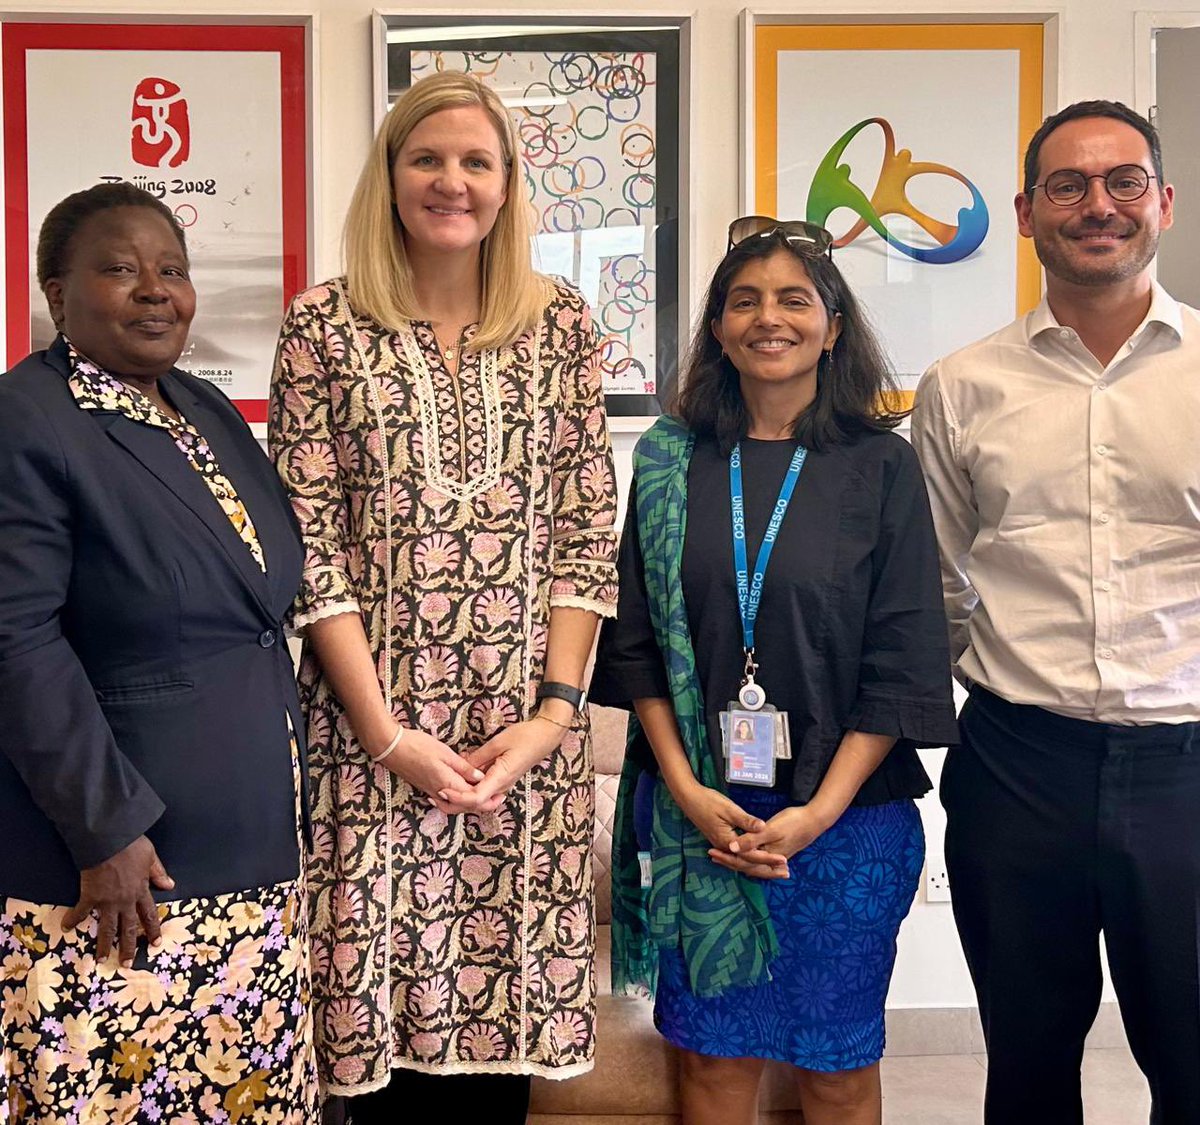 Meeting Olympians might be an everyday feature for some people. Certainly not mine even though I promote #Sport4Development. Meet Kirsty Leigh Coventry Seward, Zimbabwe’s Minister of Youth Sport, Arts and Recreation.